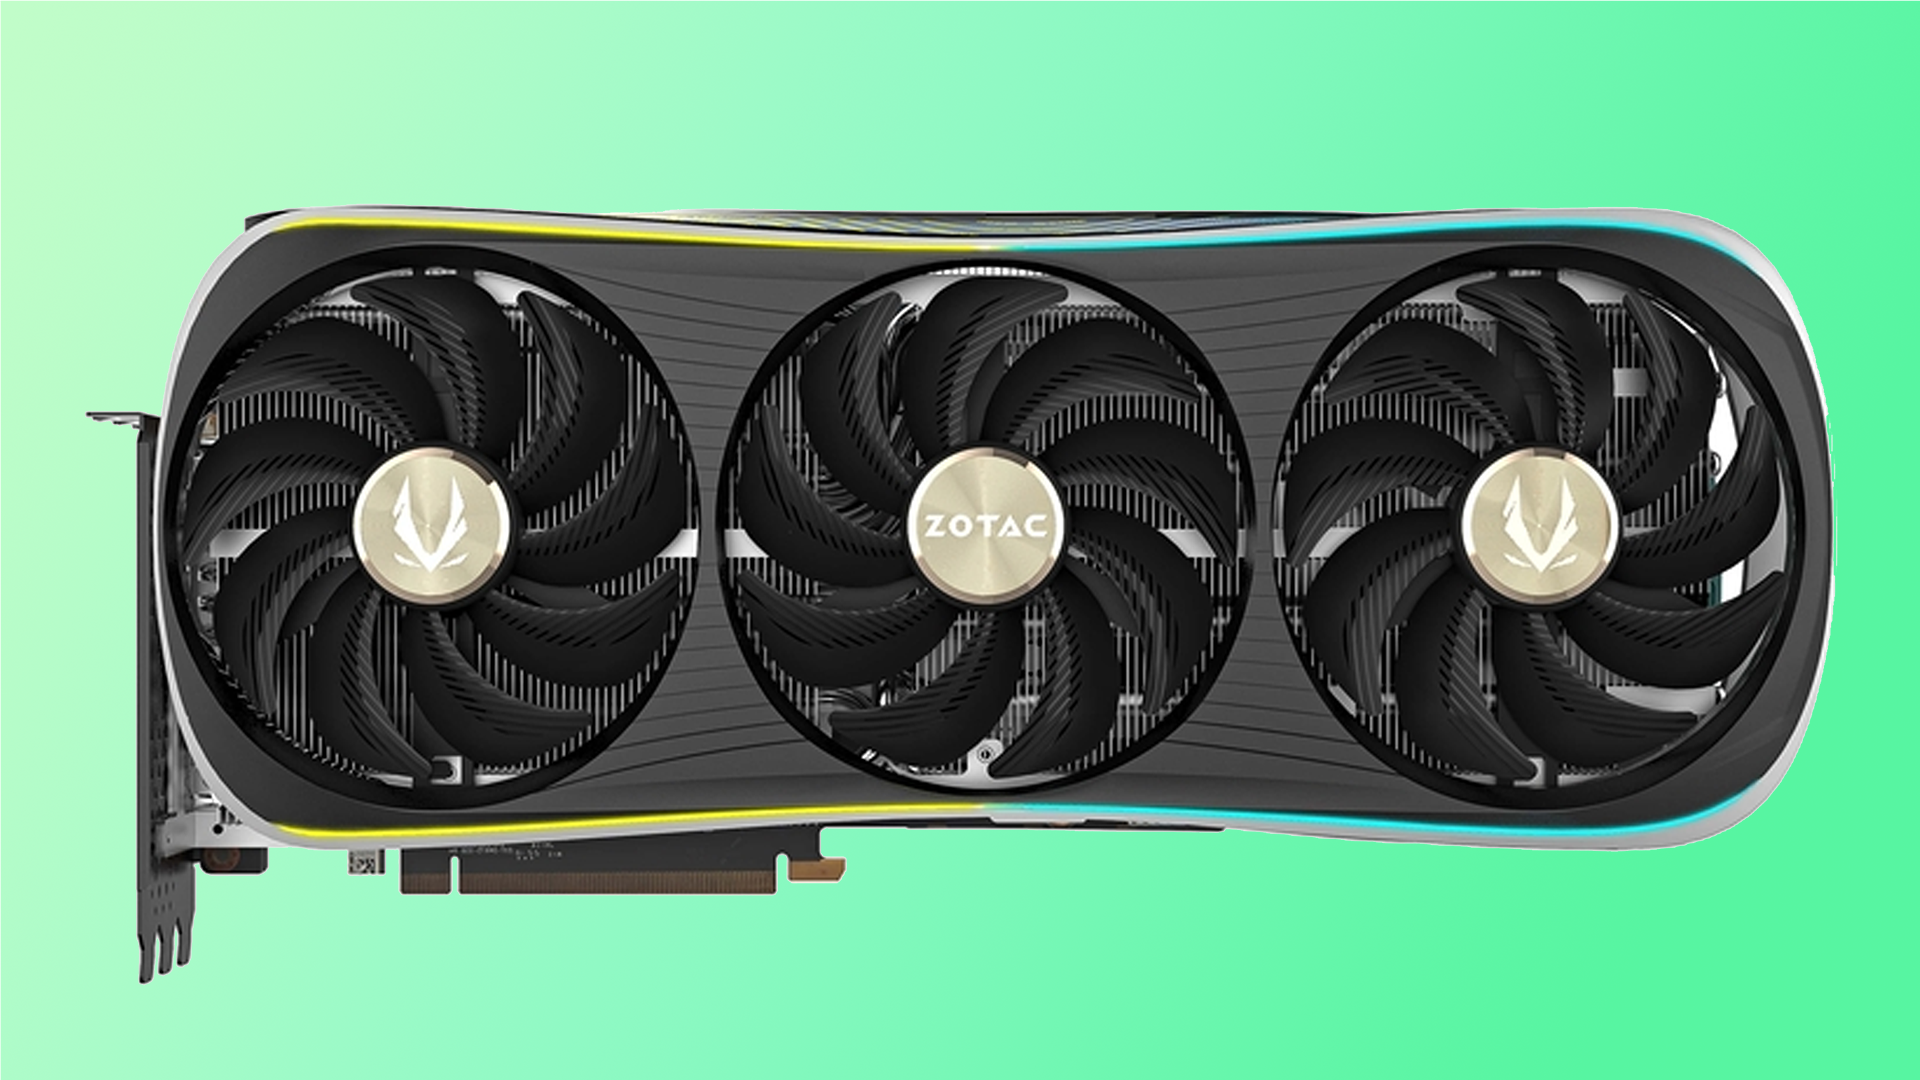 How much? These third-party RTX 4090 graphics cards are already $2,000 or more